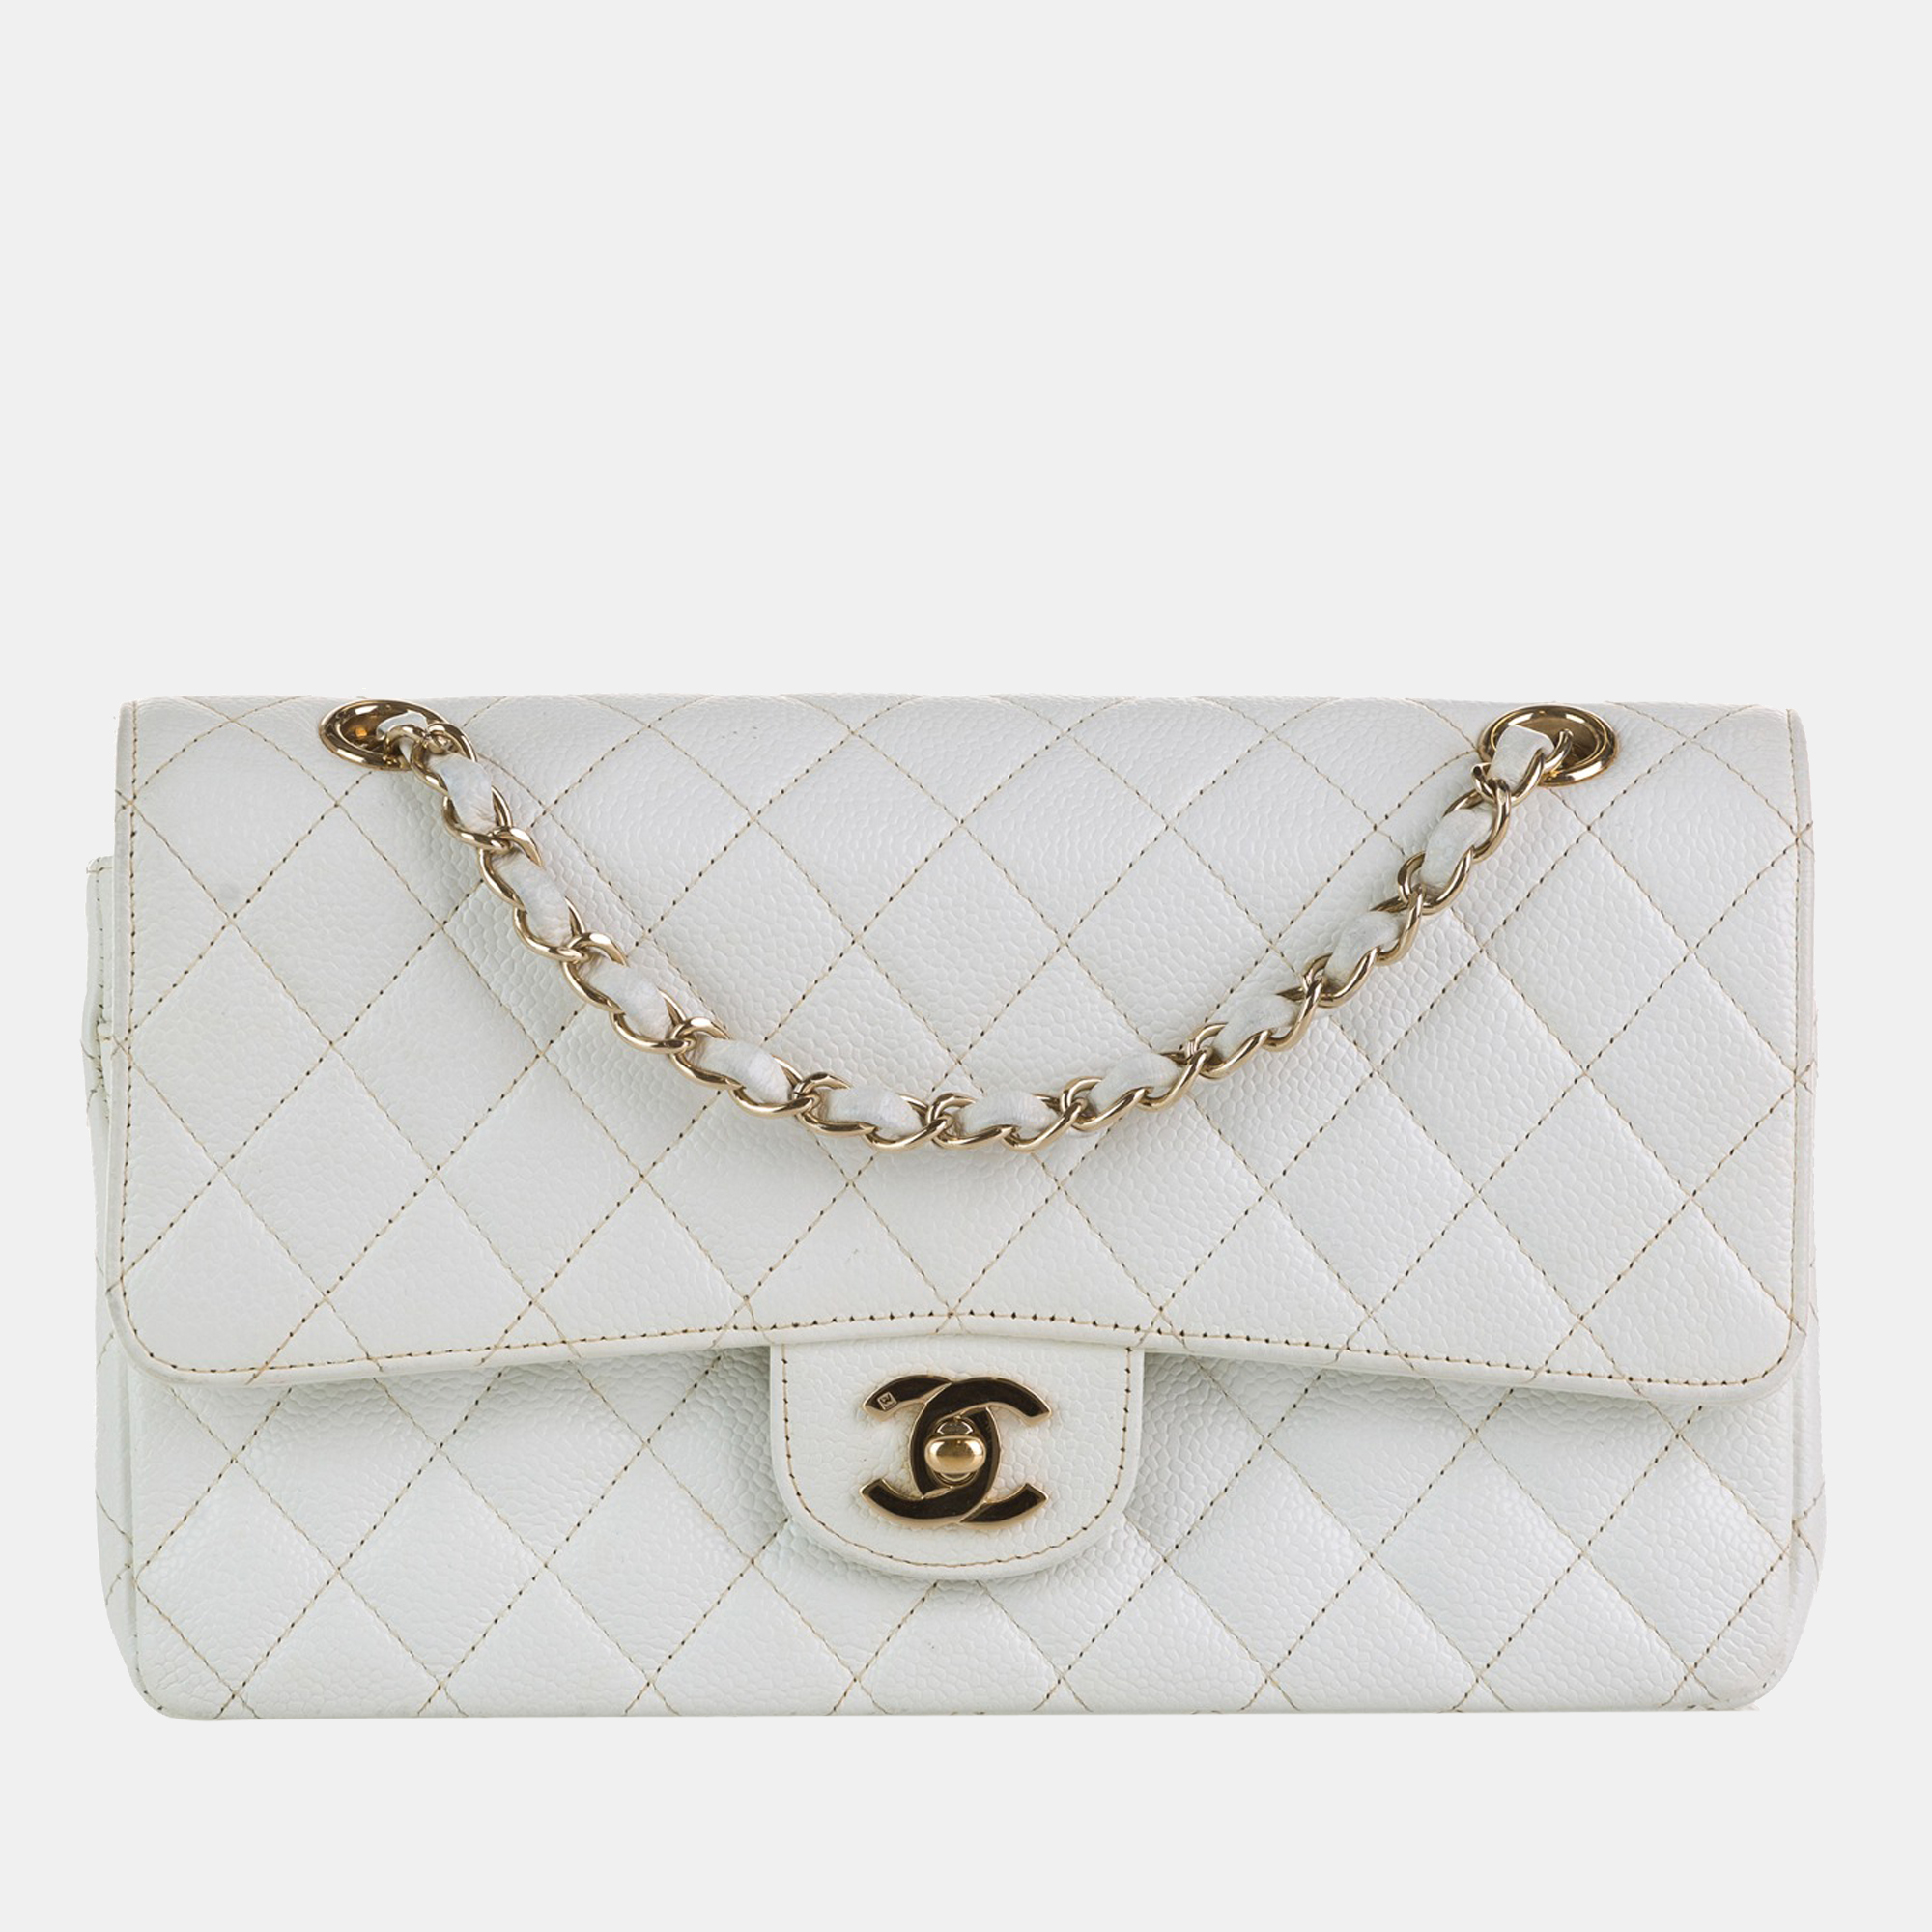 Pre-owned Chanel White Medium Classic Caviar Leather Double Flap Bag